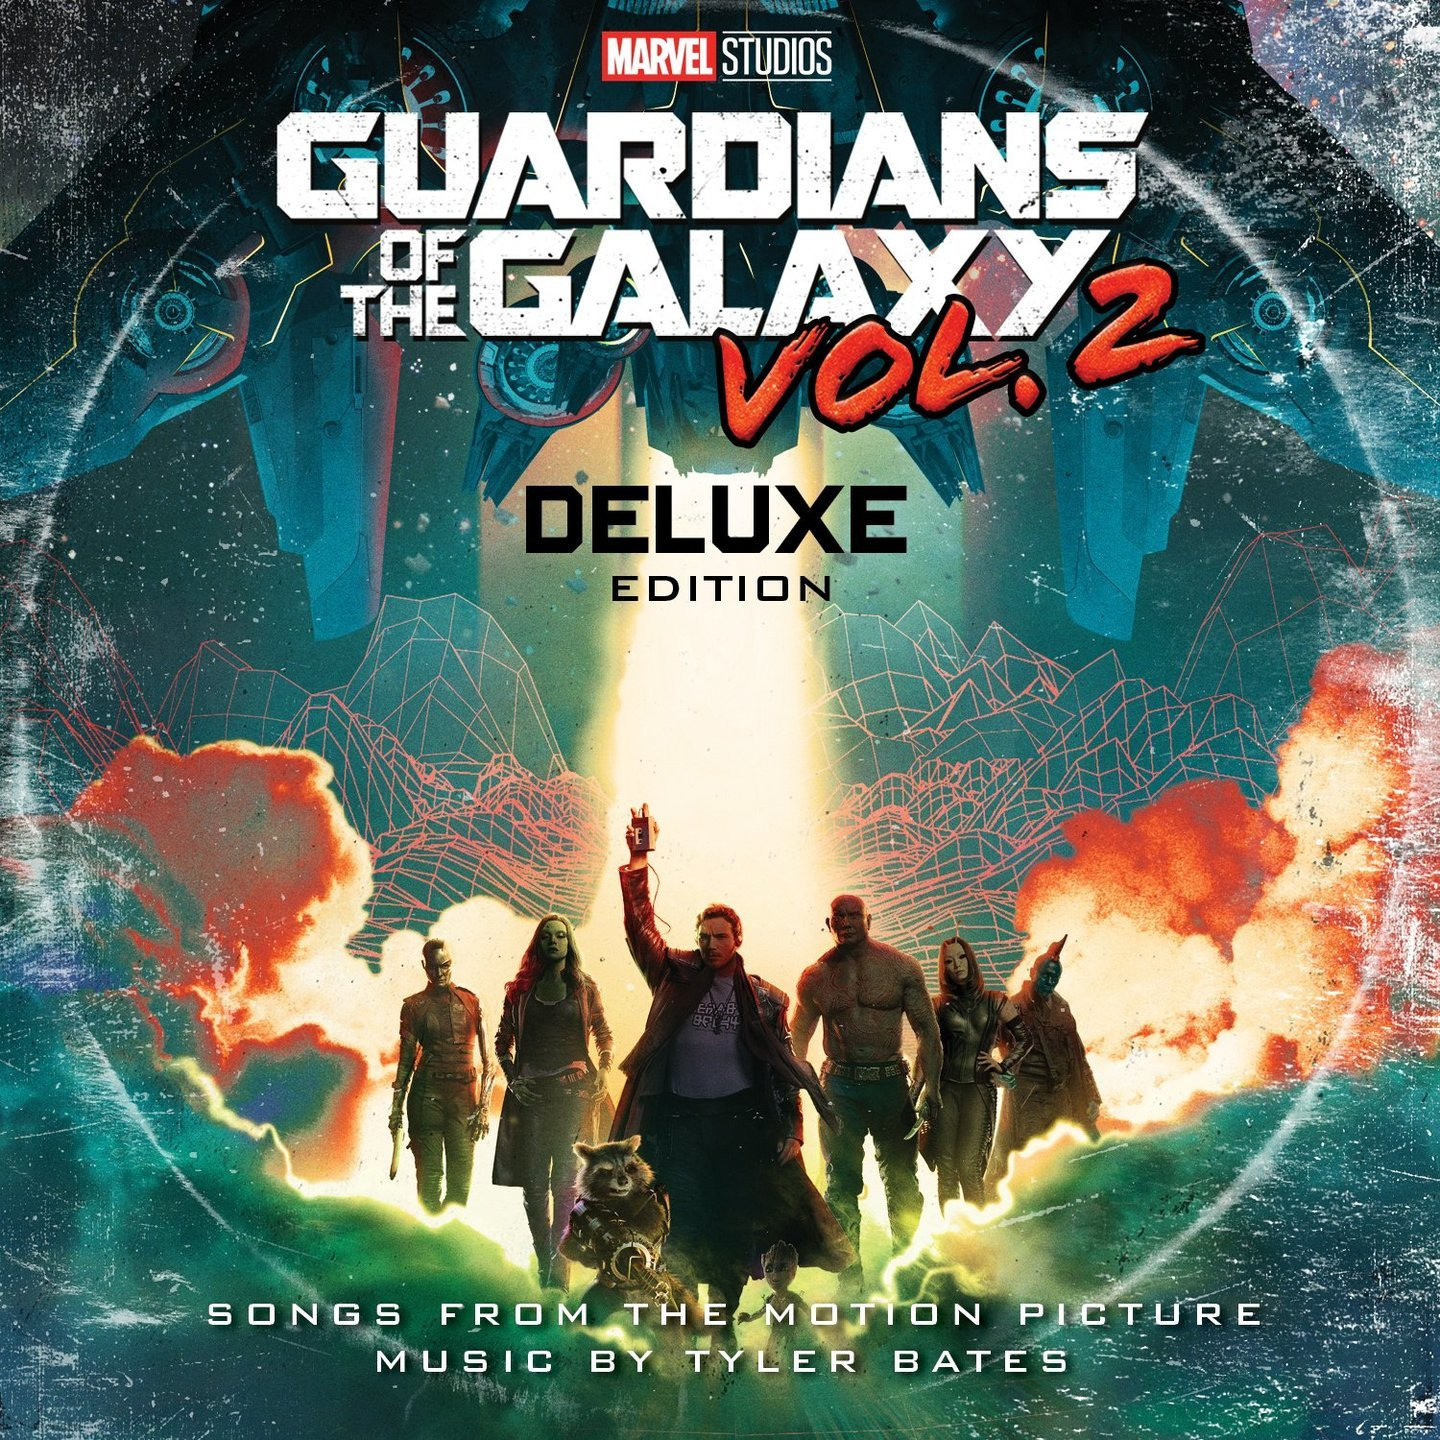 V/A - Guardians Of The Galaxy Vol. 2 (Songs From The Motion Picture): Deluxe Edition 2xLP